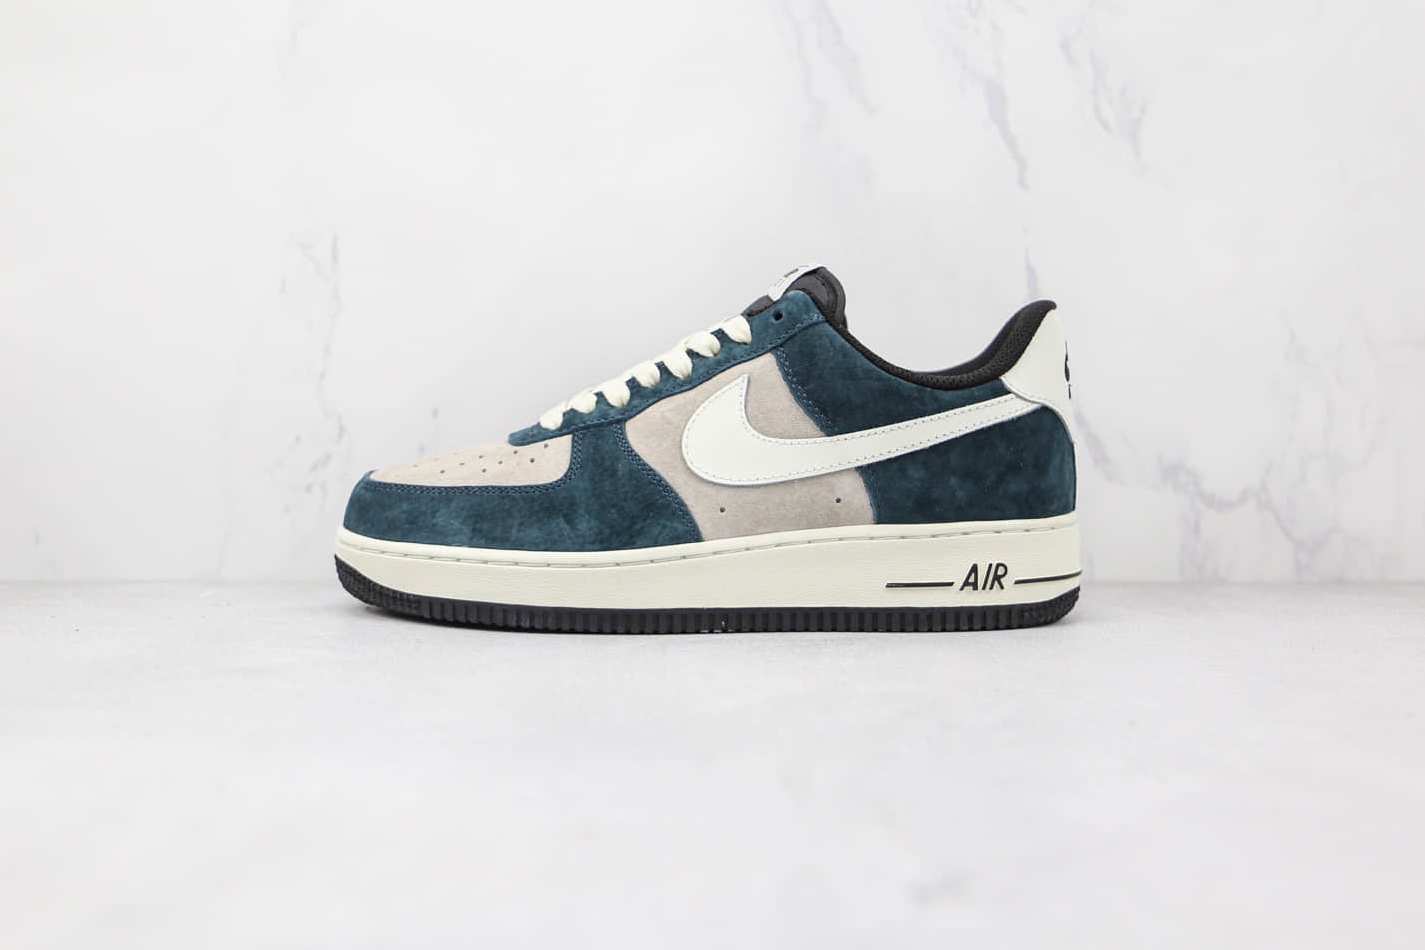 Nike Air Force 1 07 Low Dark Green Grey Beige White NT9955-318 - Stylish and Comfortable Footwear for Men